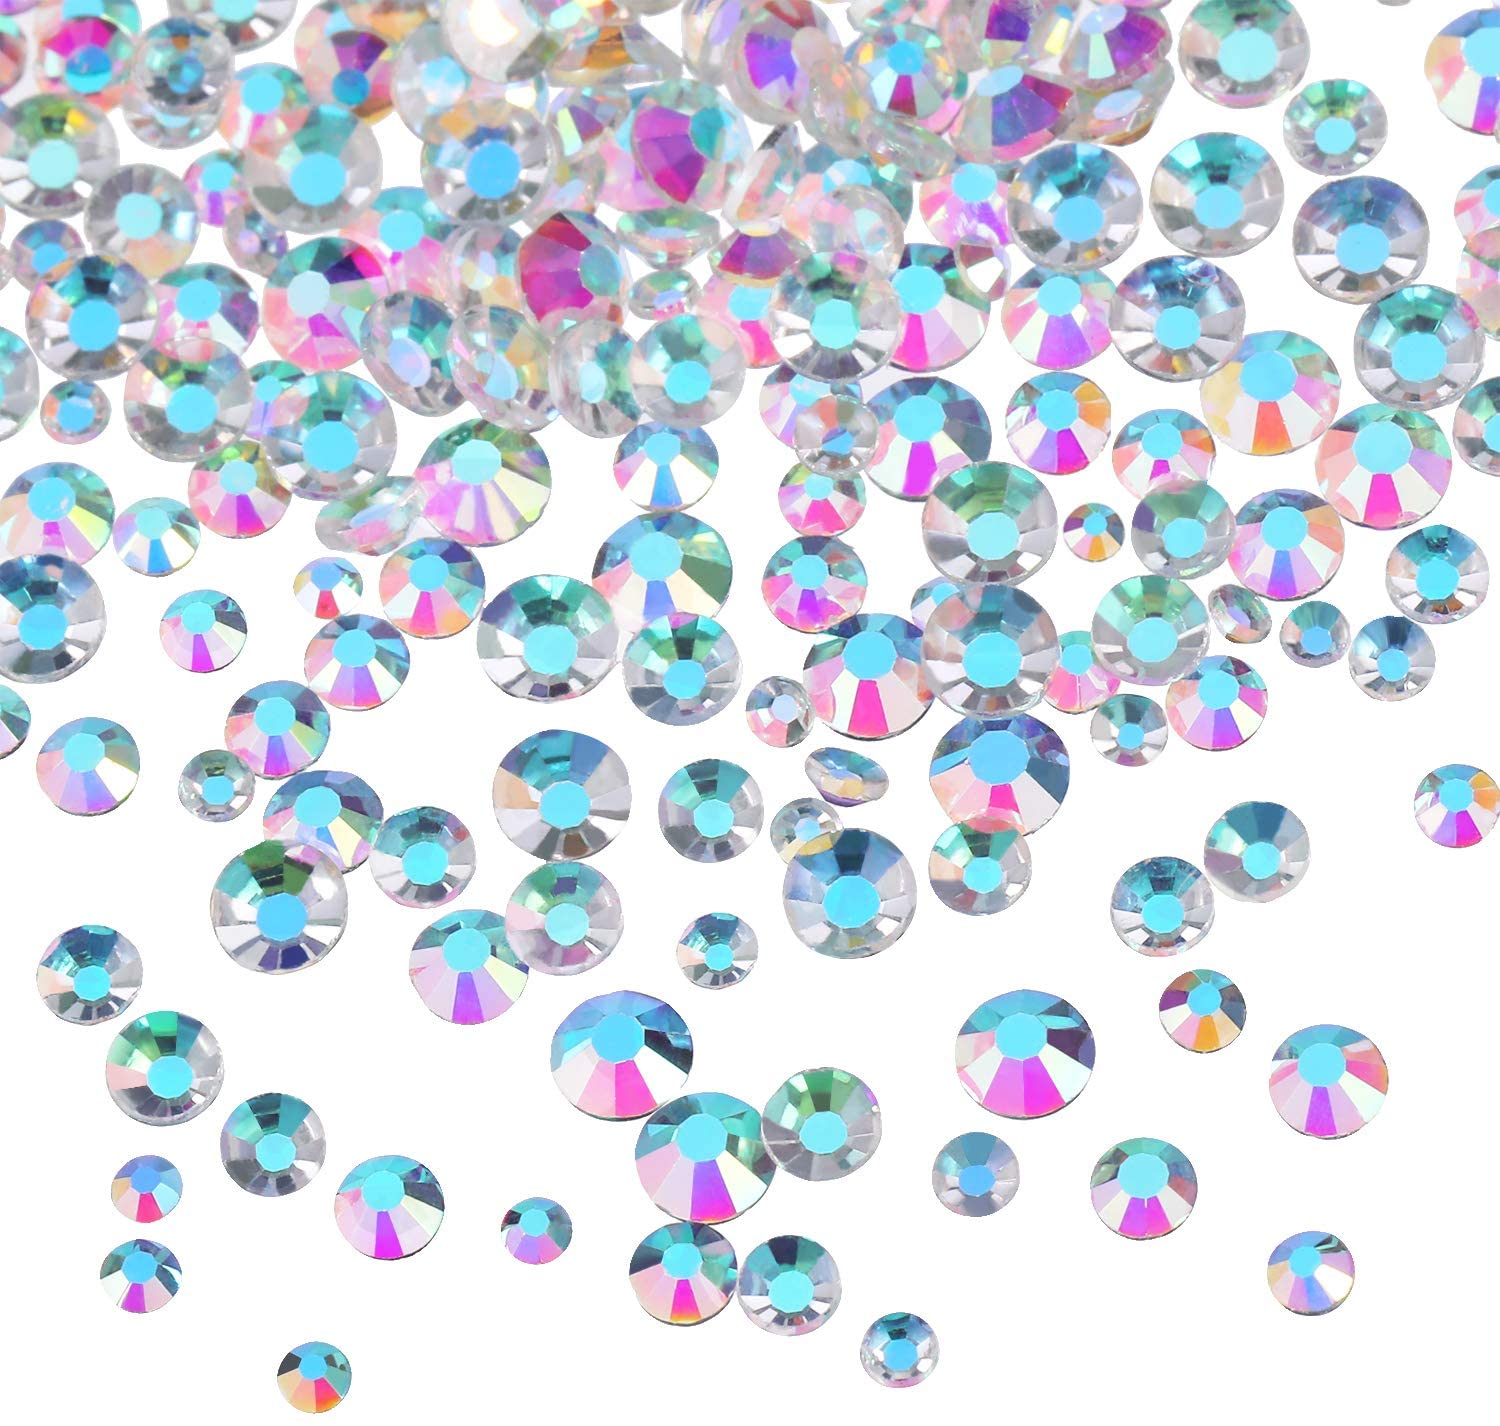 Bememo 3456 Pieces Nail Crystals AB Nail Art Rhinestones Round Beads Flatback Glass Charms Gems Stones, 6 Sizes for Nails Decoration Makeup Clothes Shoes (Iridescent)